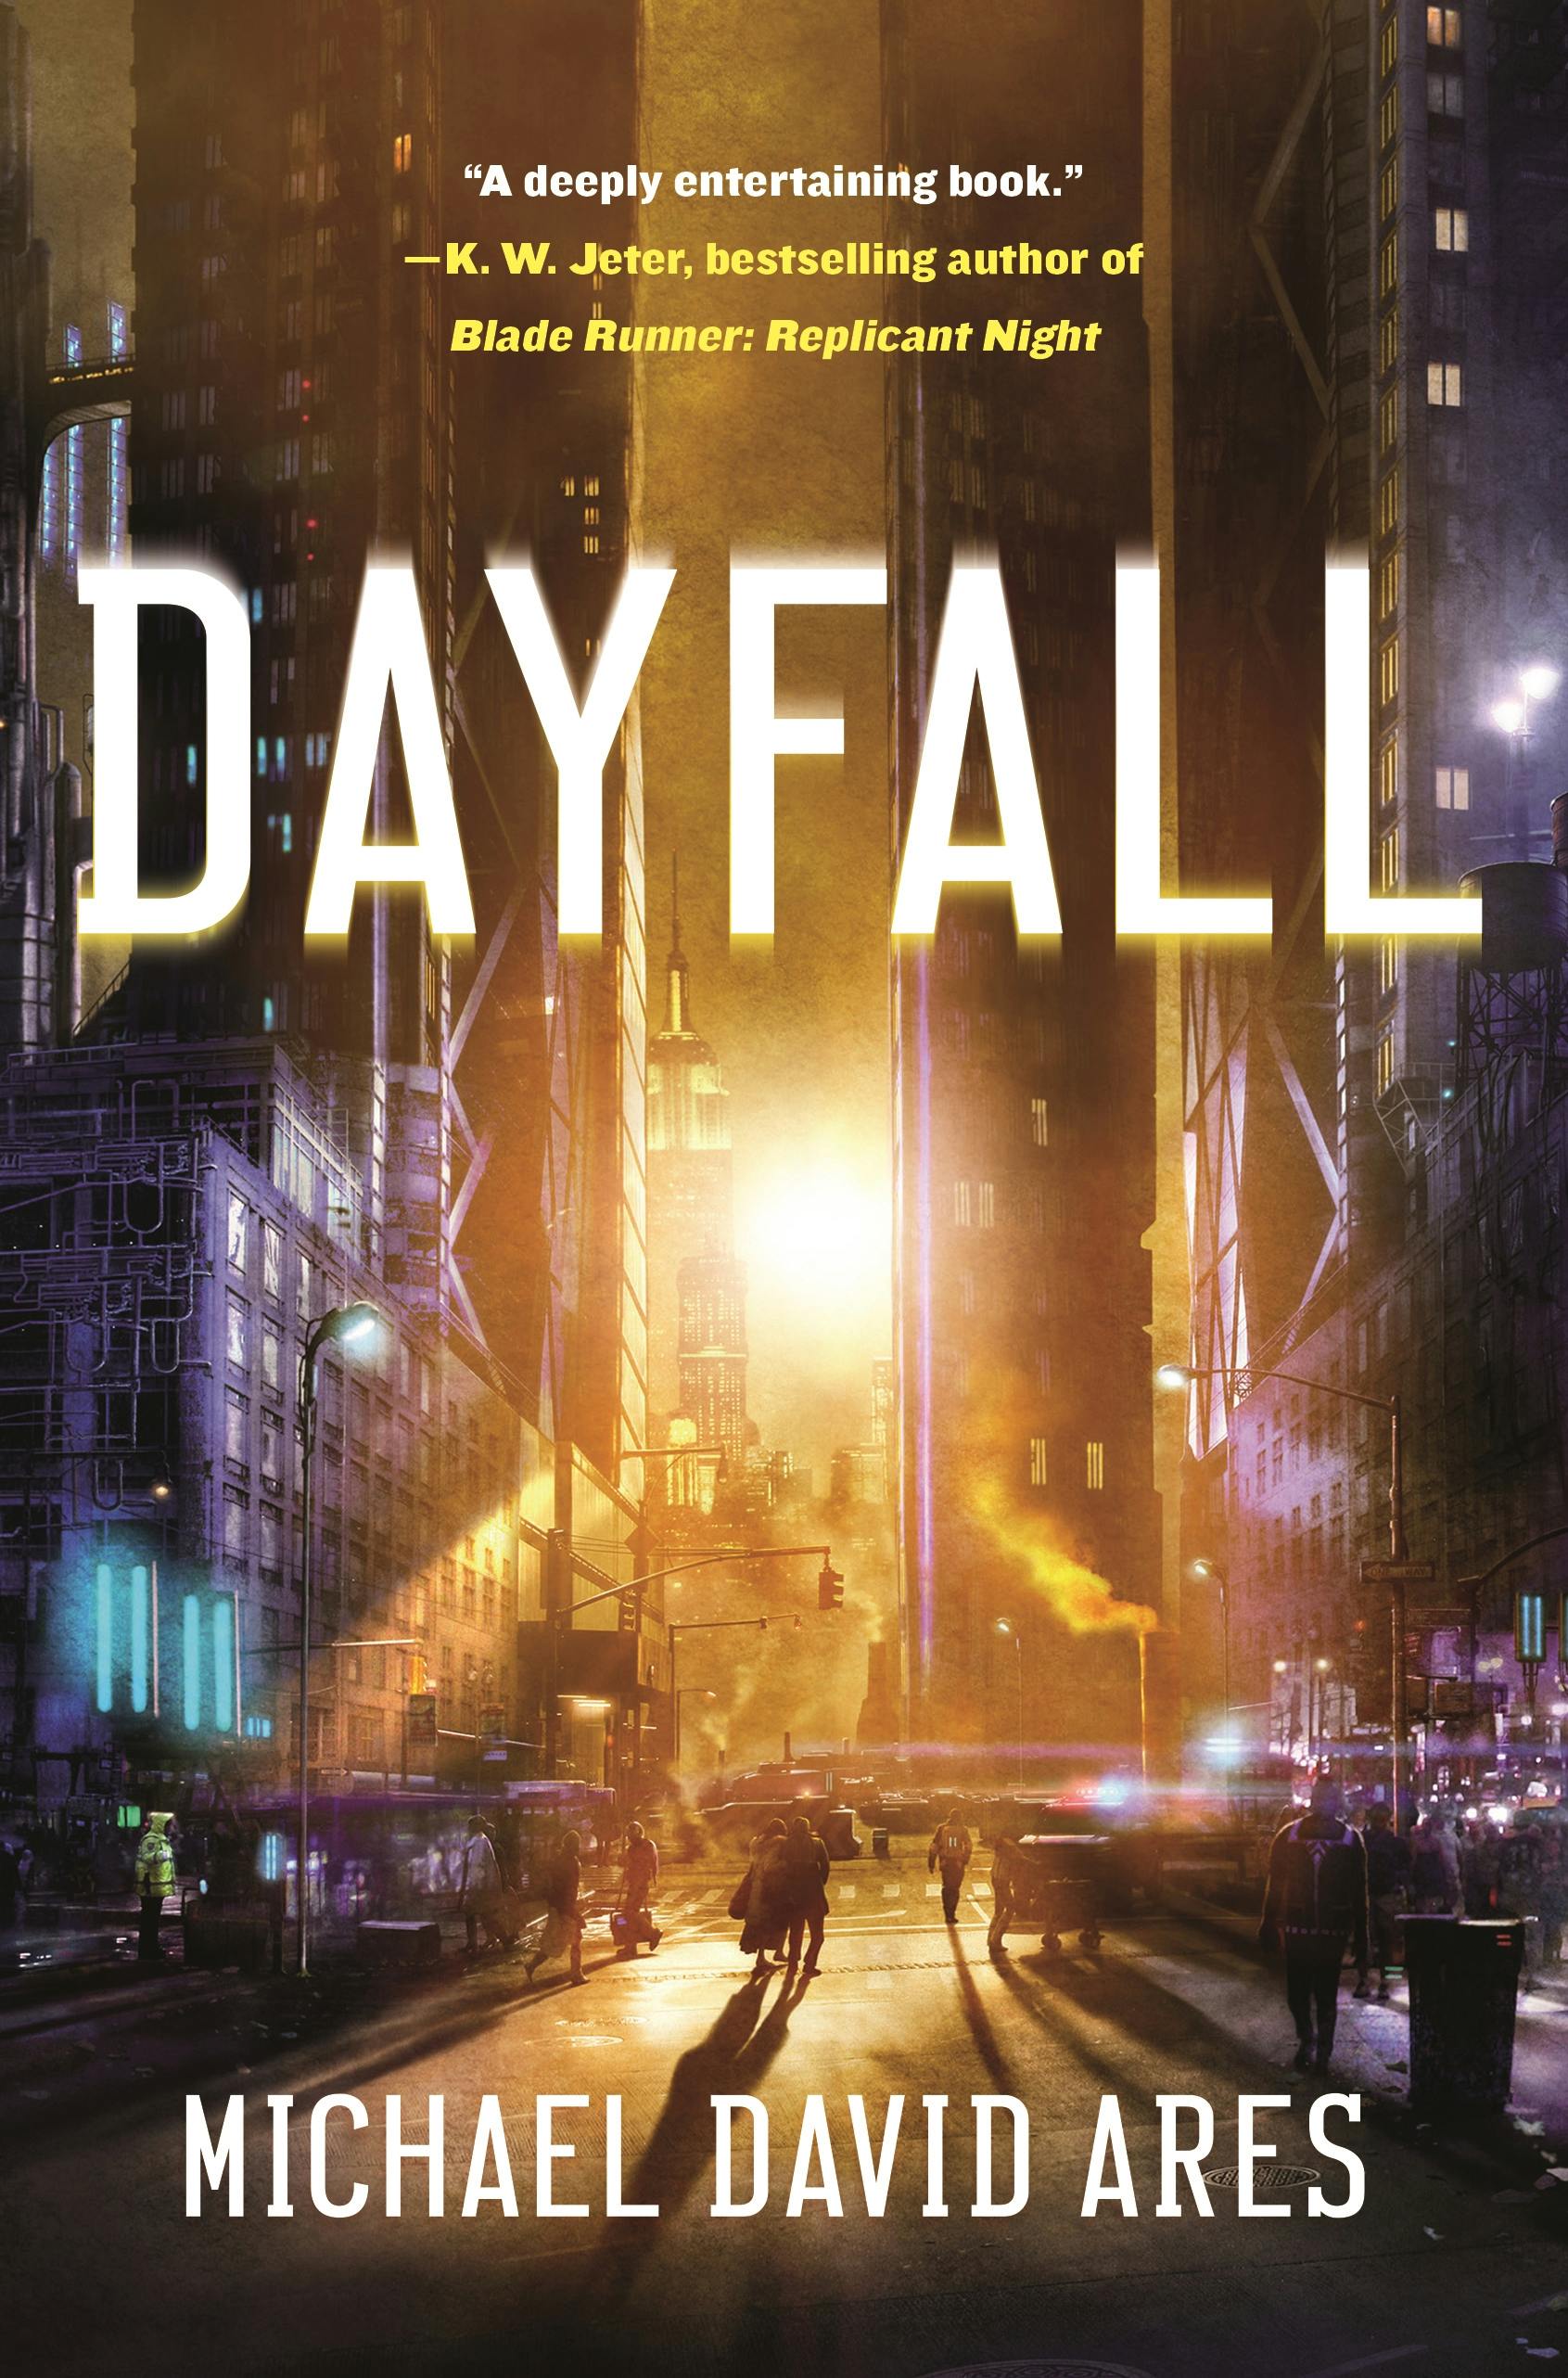 Cover for the book titled as: Dayfall